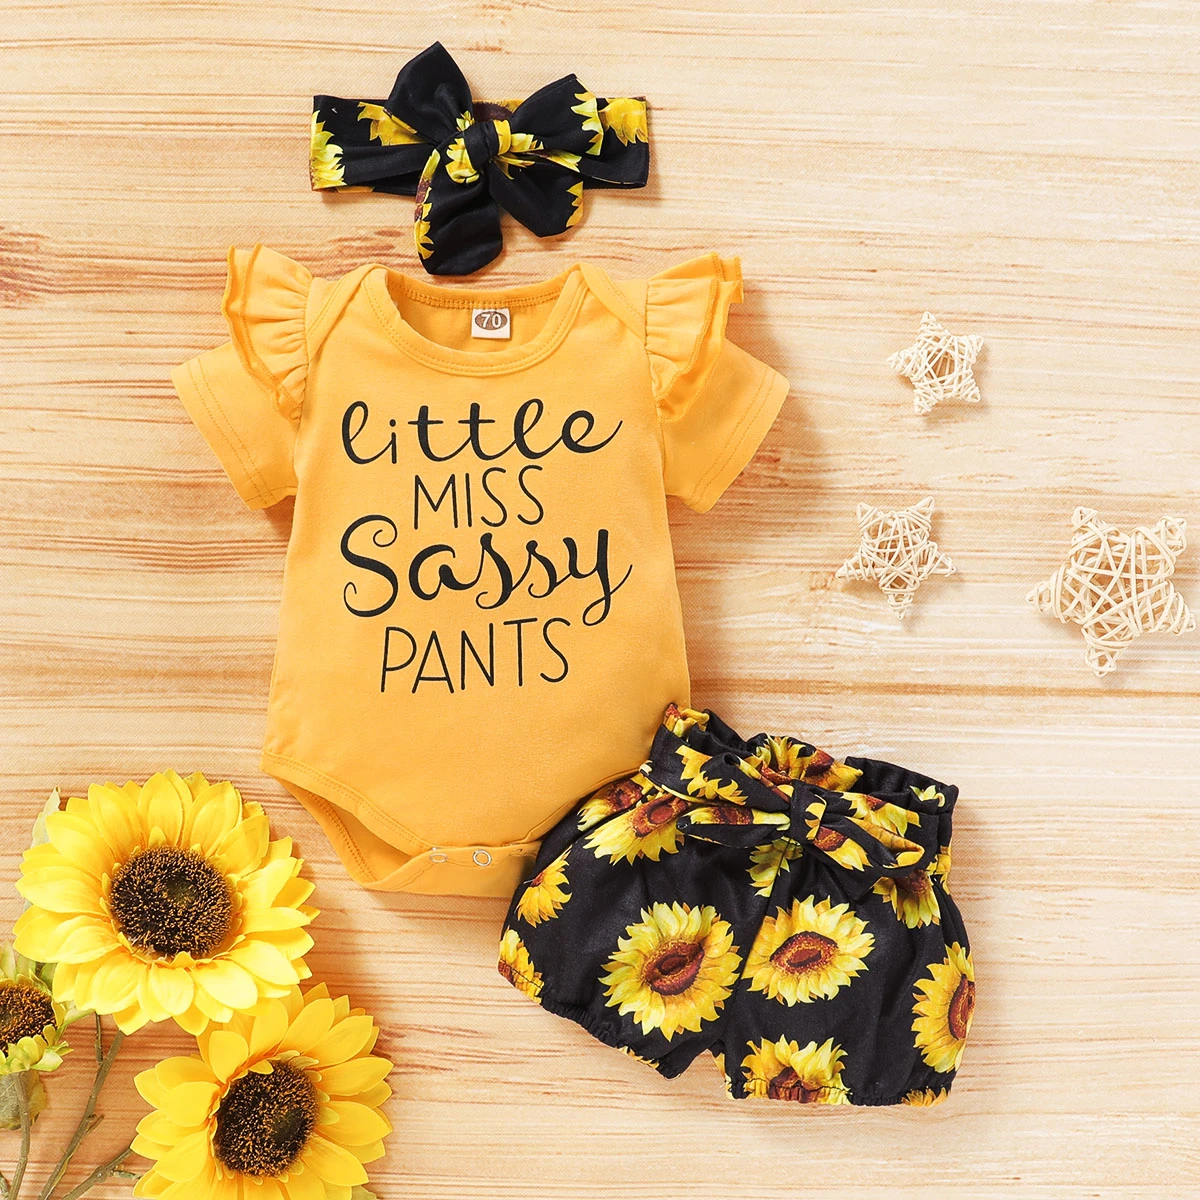 Newborn Infant Baby Girl Romper Tops Sunflower Floral Pants Headband Outfits Set 